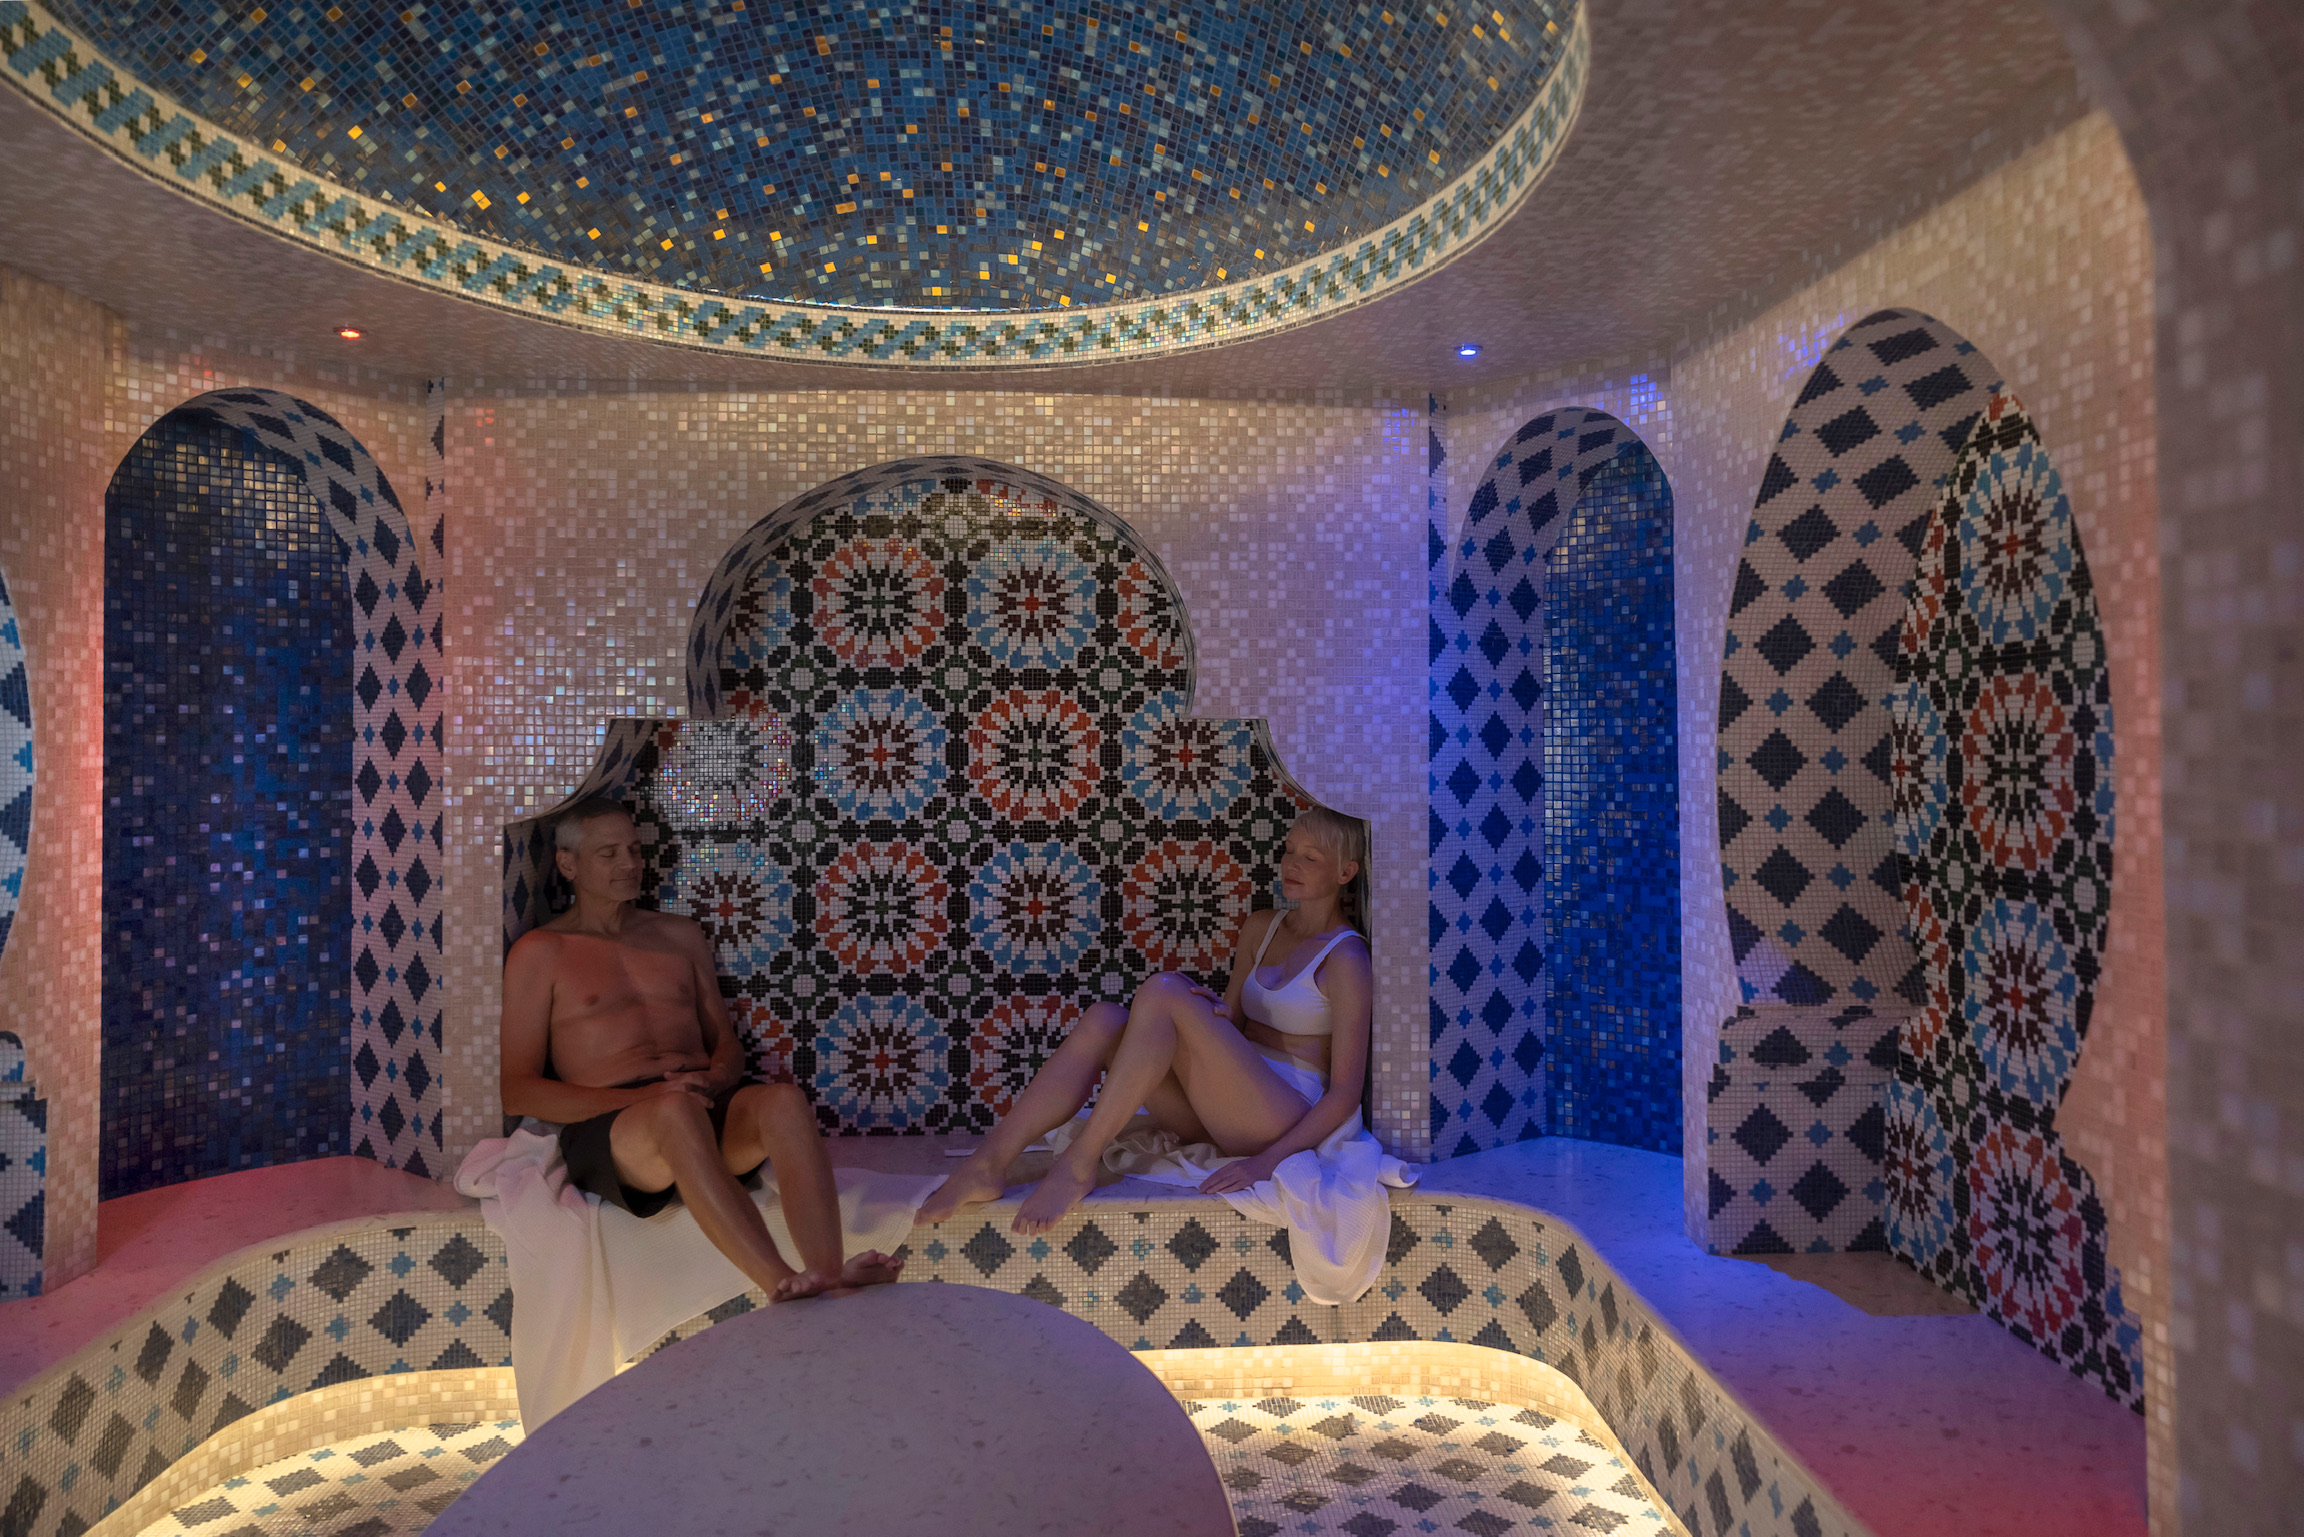 Two individuals relaxing in a colorful tiled morroccan hammam room.